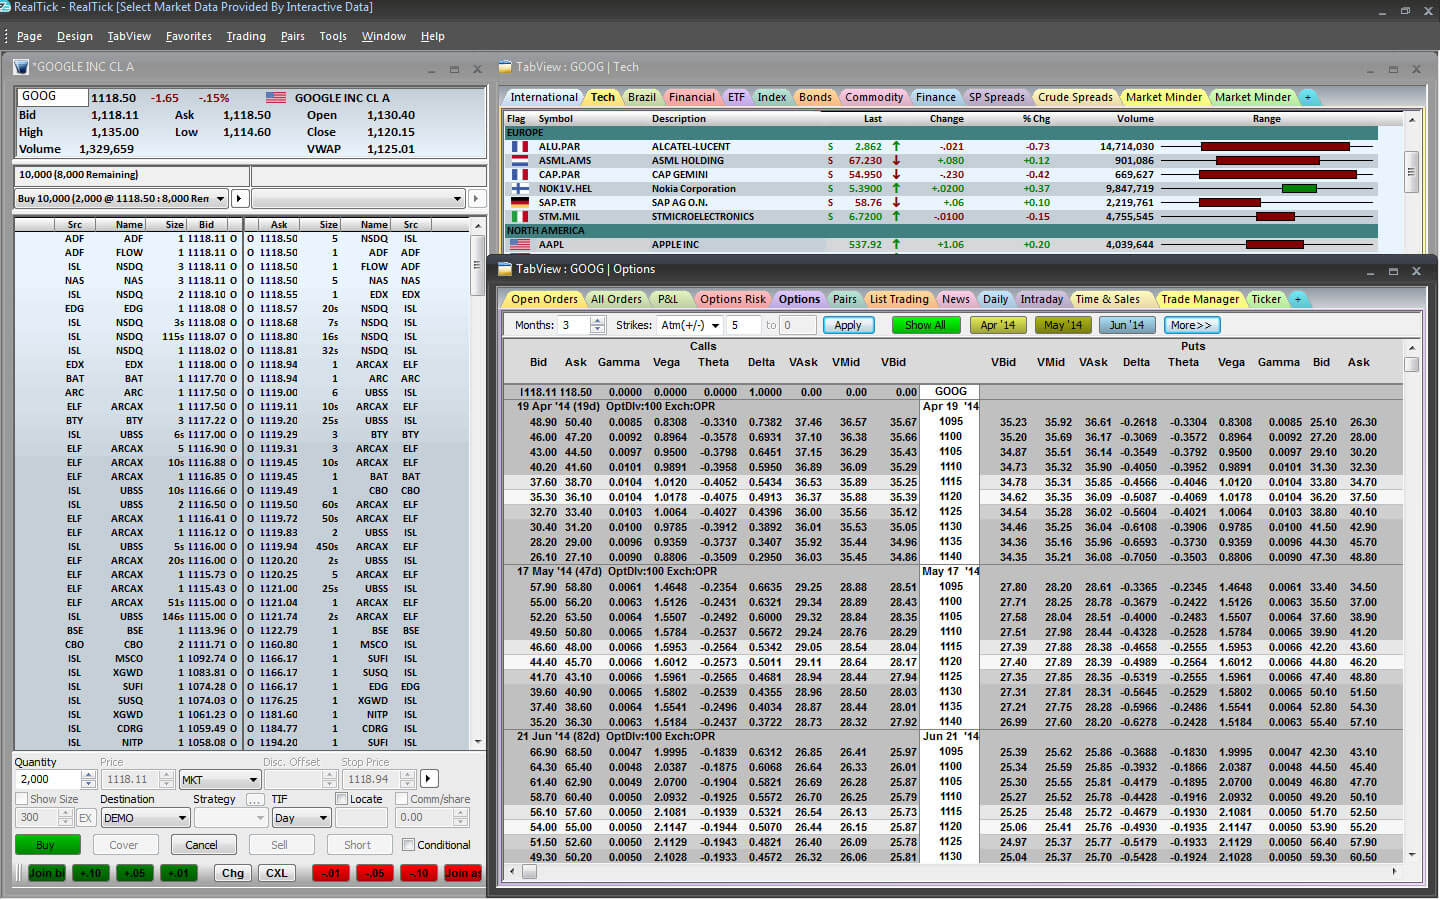 realtick ems sophisticated trading tool provider